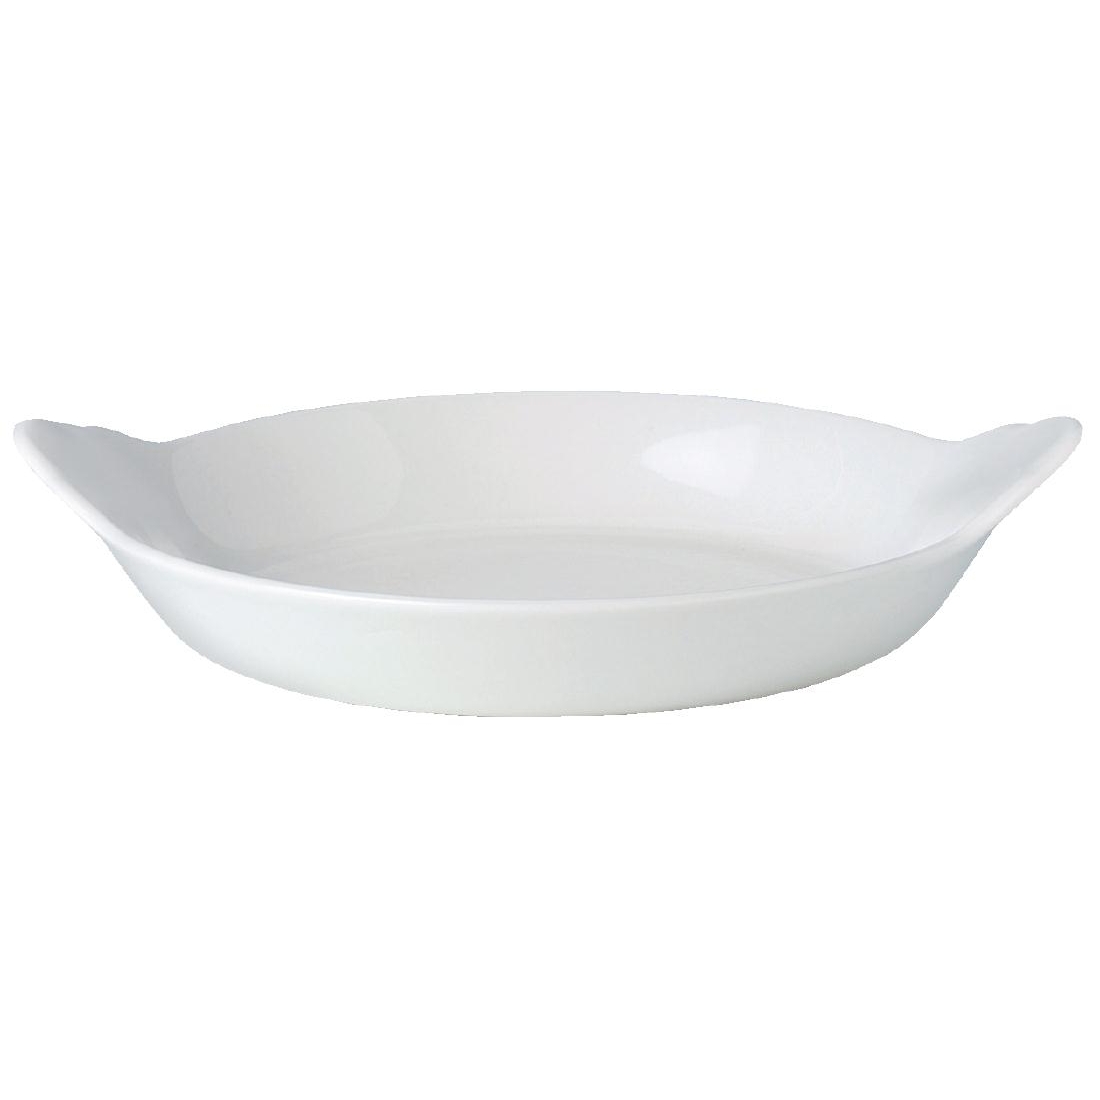 Steelite Simplicity Cookware Round Eared Dishes 165mm